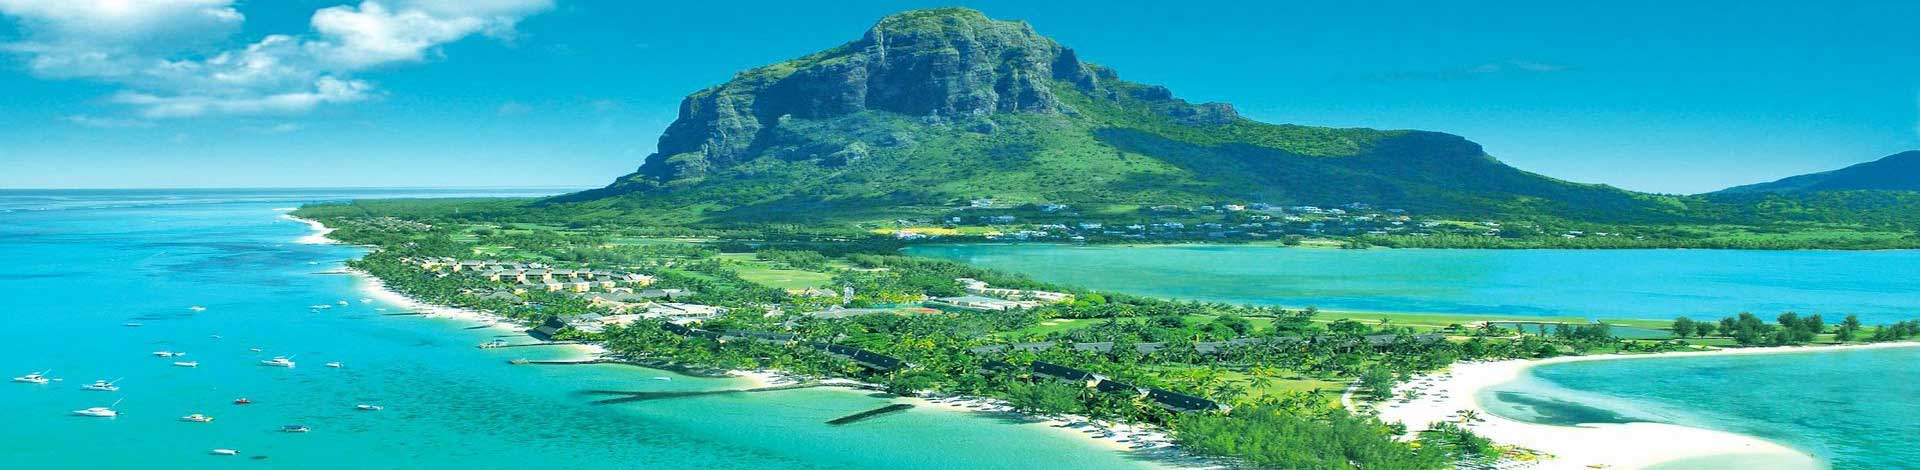 Mauritius Island Wallpaper 1920x1080. DH Holidays Your